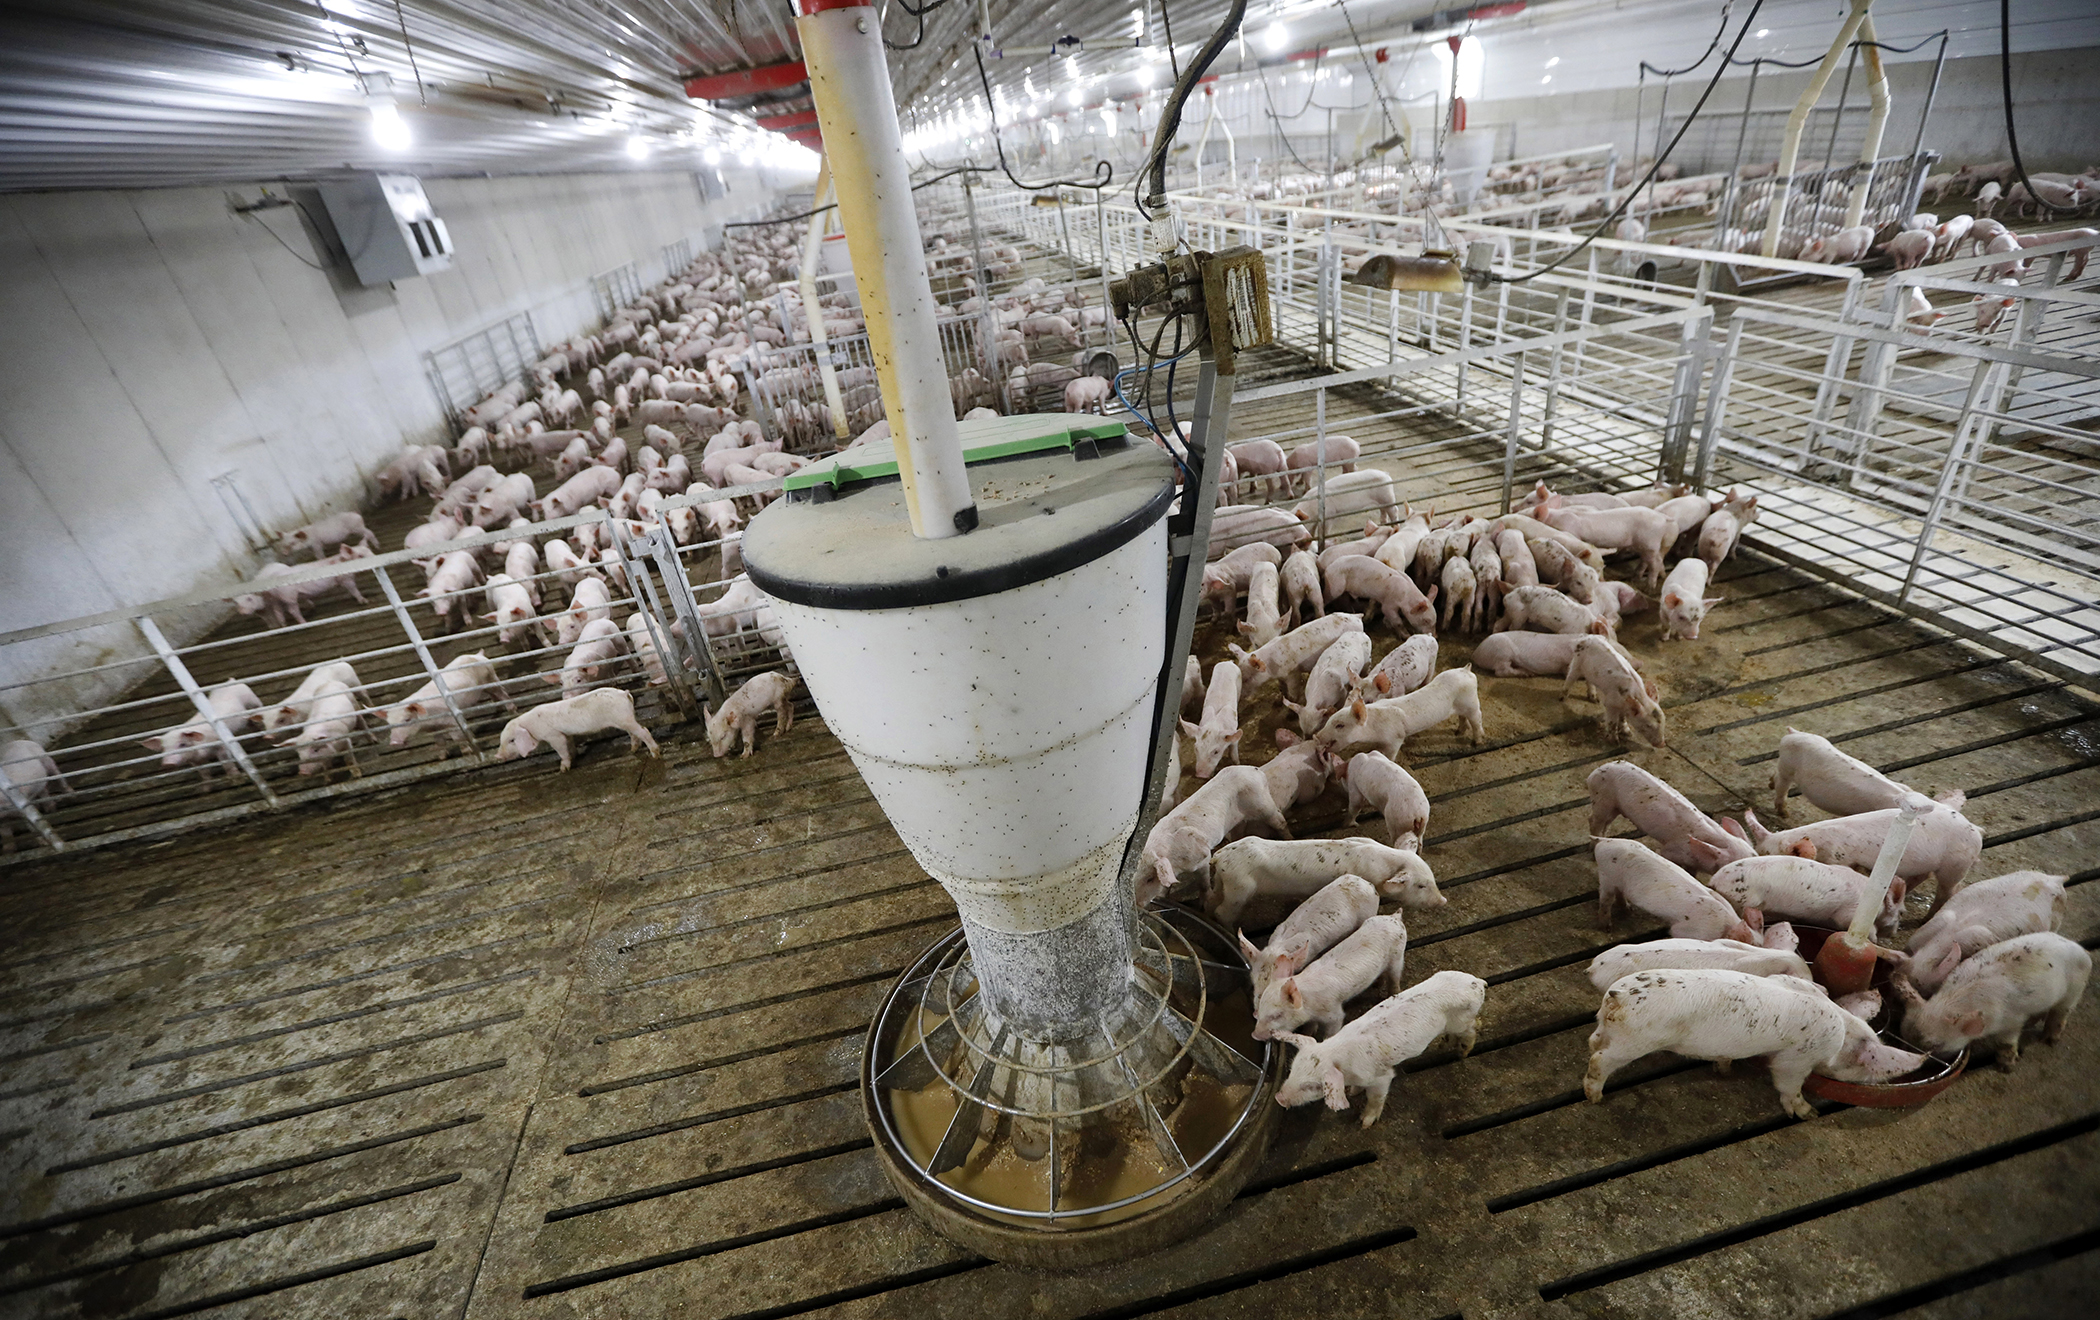 Hogs feed in a pen in a concentrated animal feeding operation